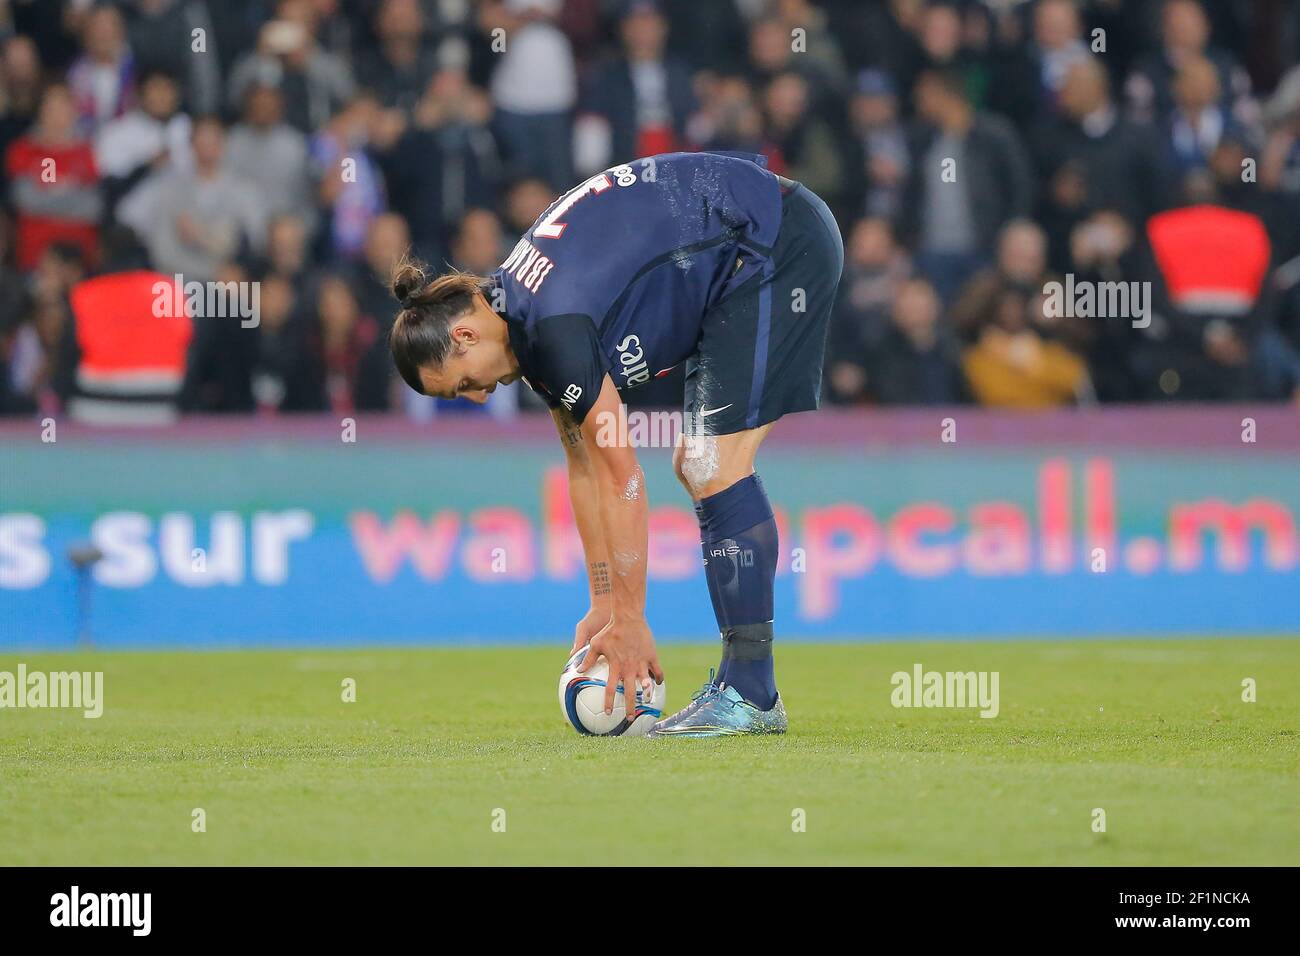 Zlatan Ibrahimovic (psg) during the French championship L1 football match  between Paris Saint Germain and Olympique de Marseille on October 4, 2015  at Parc des Princes stadium in Paris, France. Photo Stephane